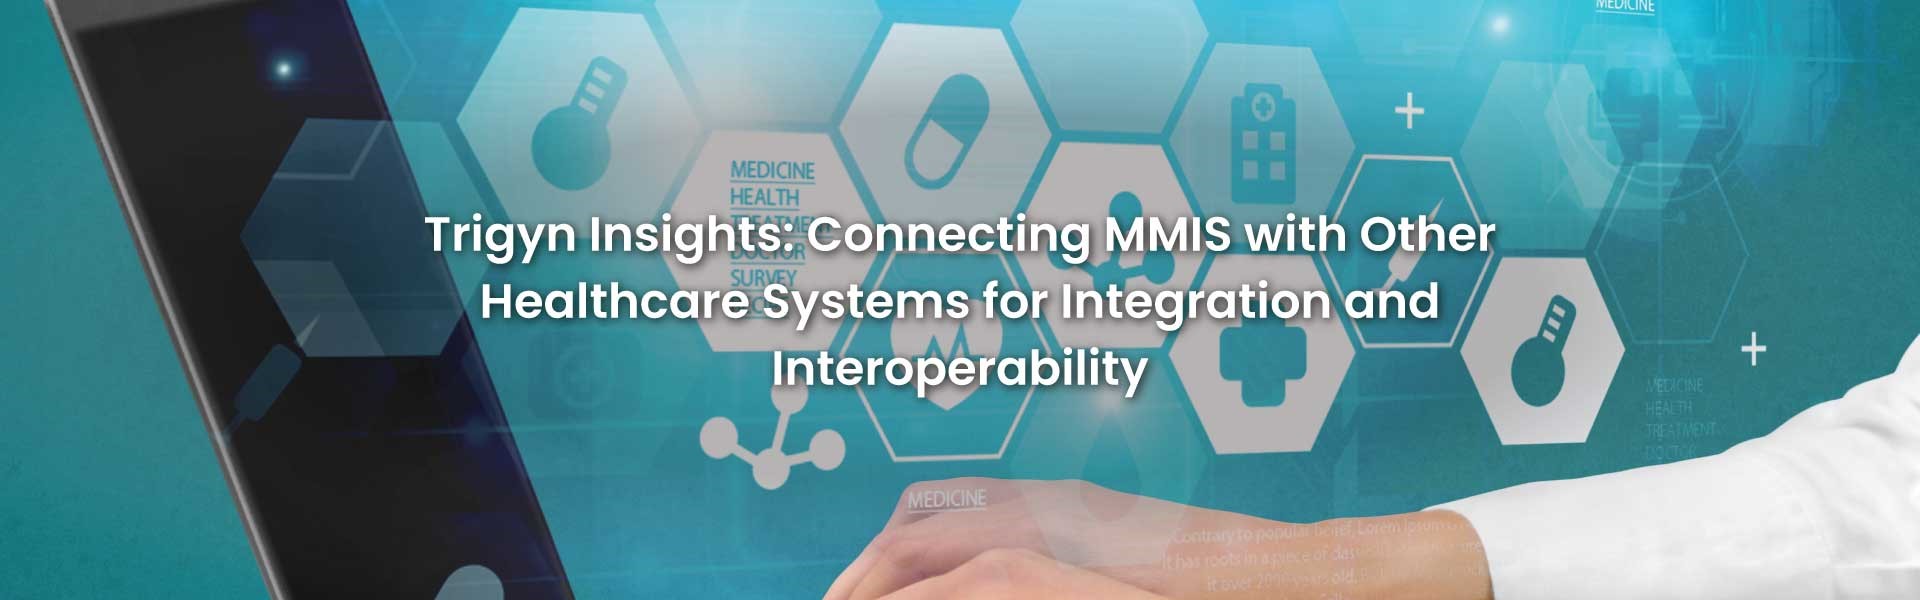 Connecting MMIS with Other Healthcare Systems